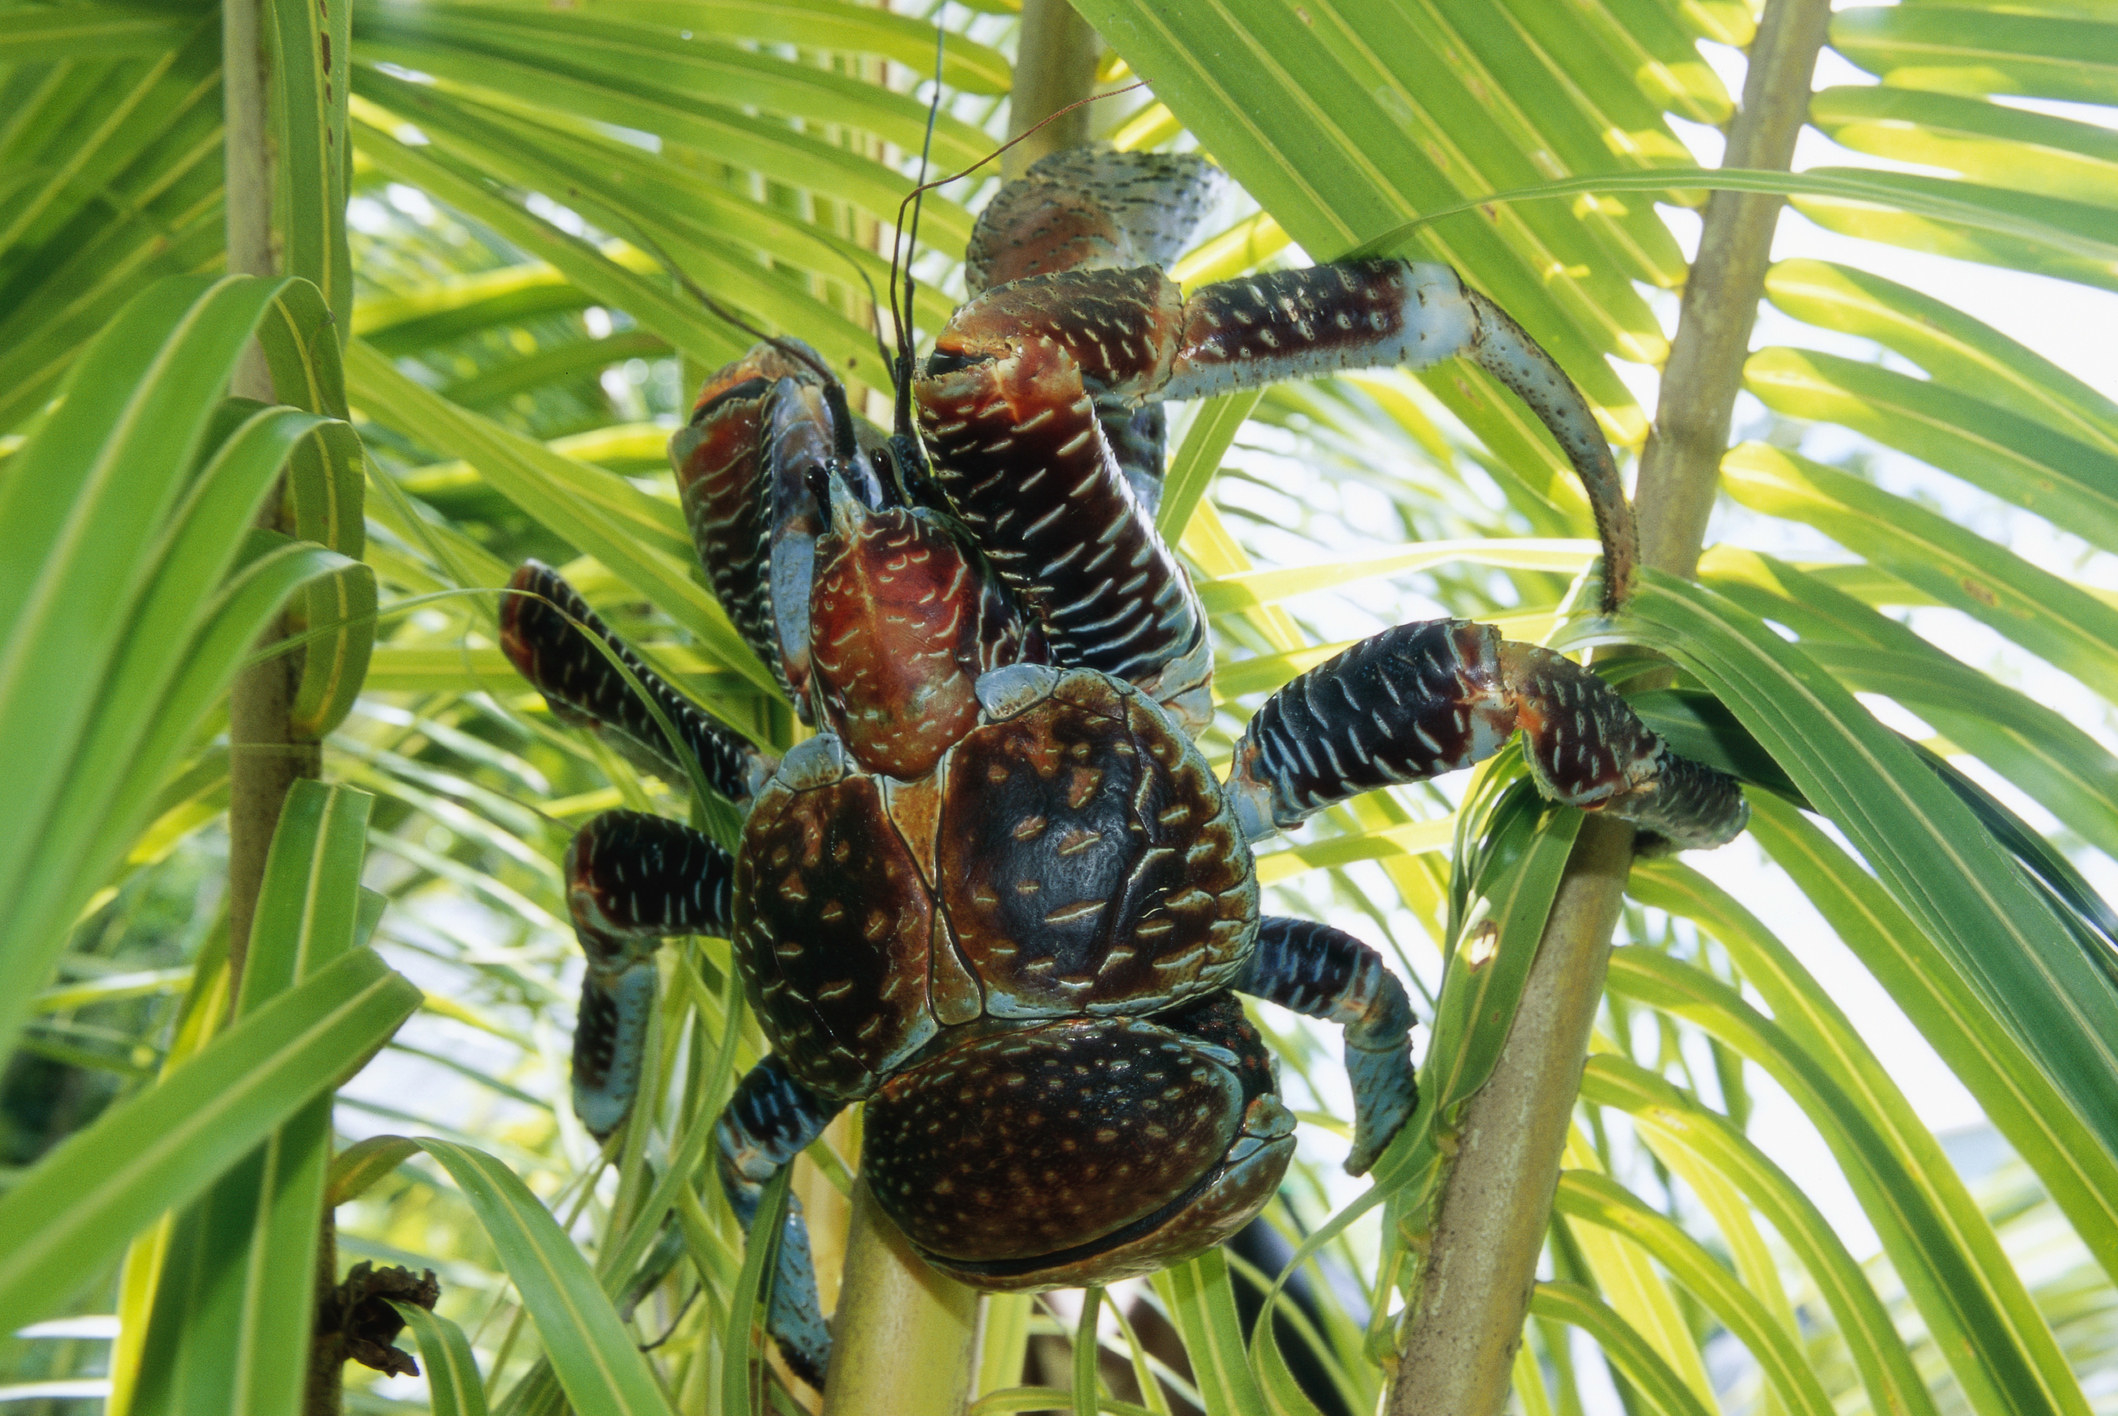 A massive coconut crab, which are presumably named for their resemblance to a bunch of coconuts, climbing a tree